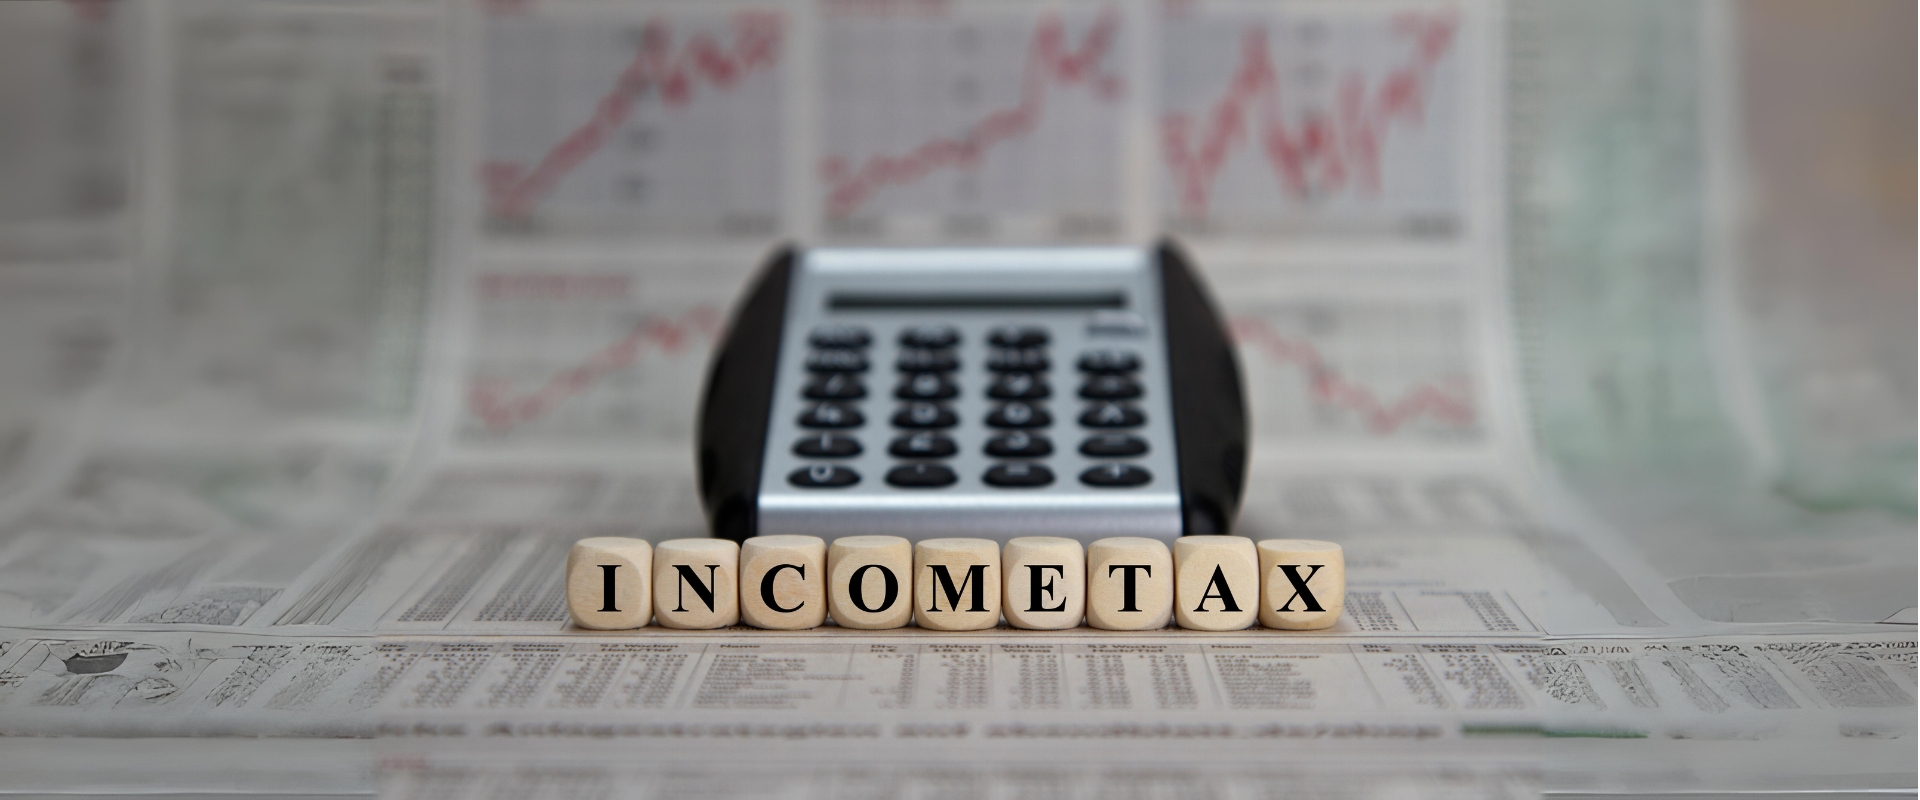 Let's Understand Corporate Income Tax for Business Growth